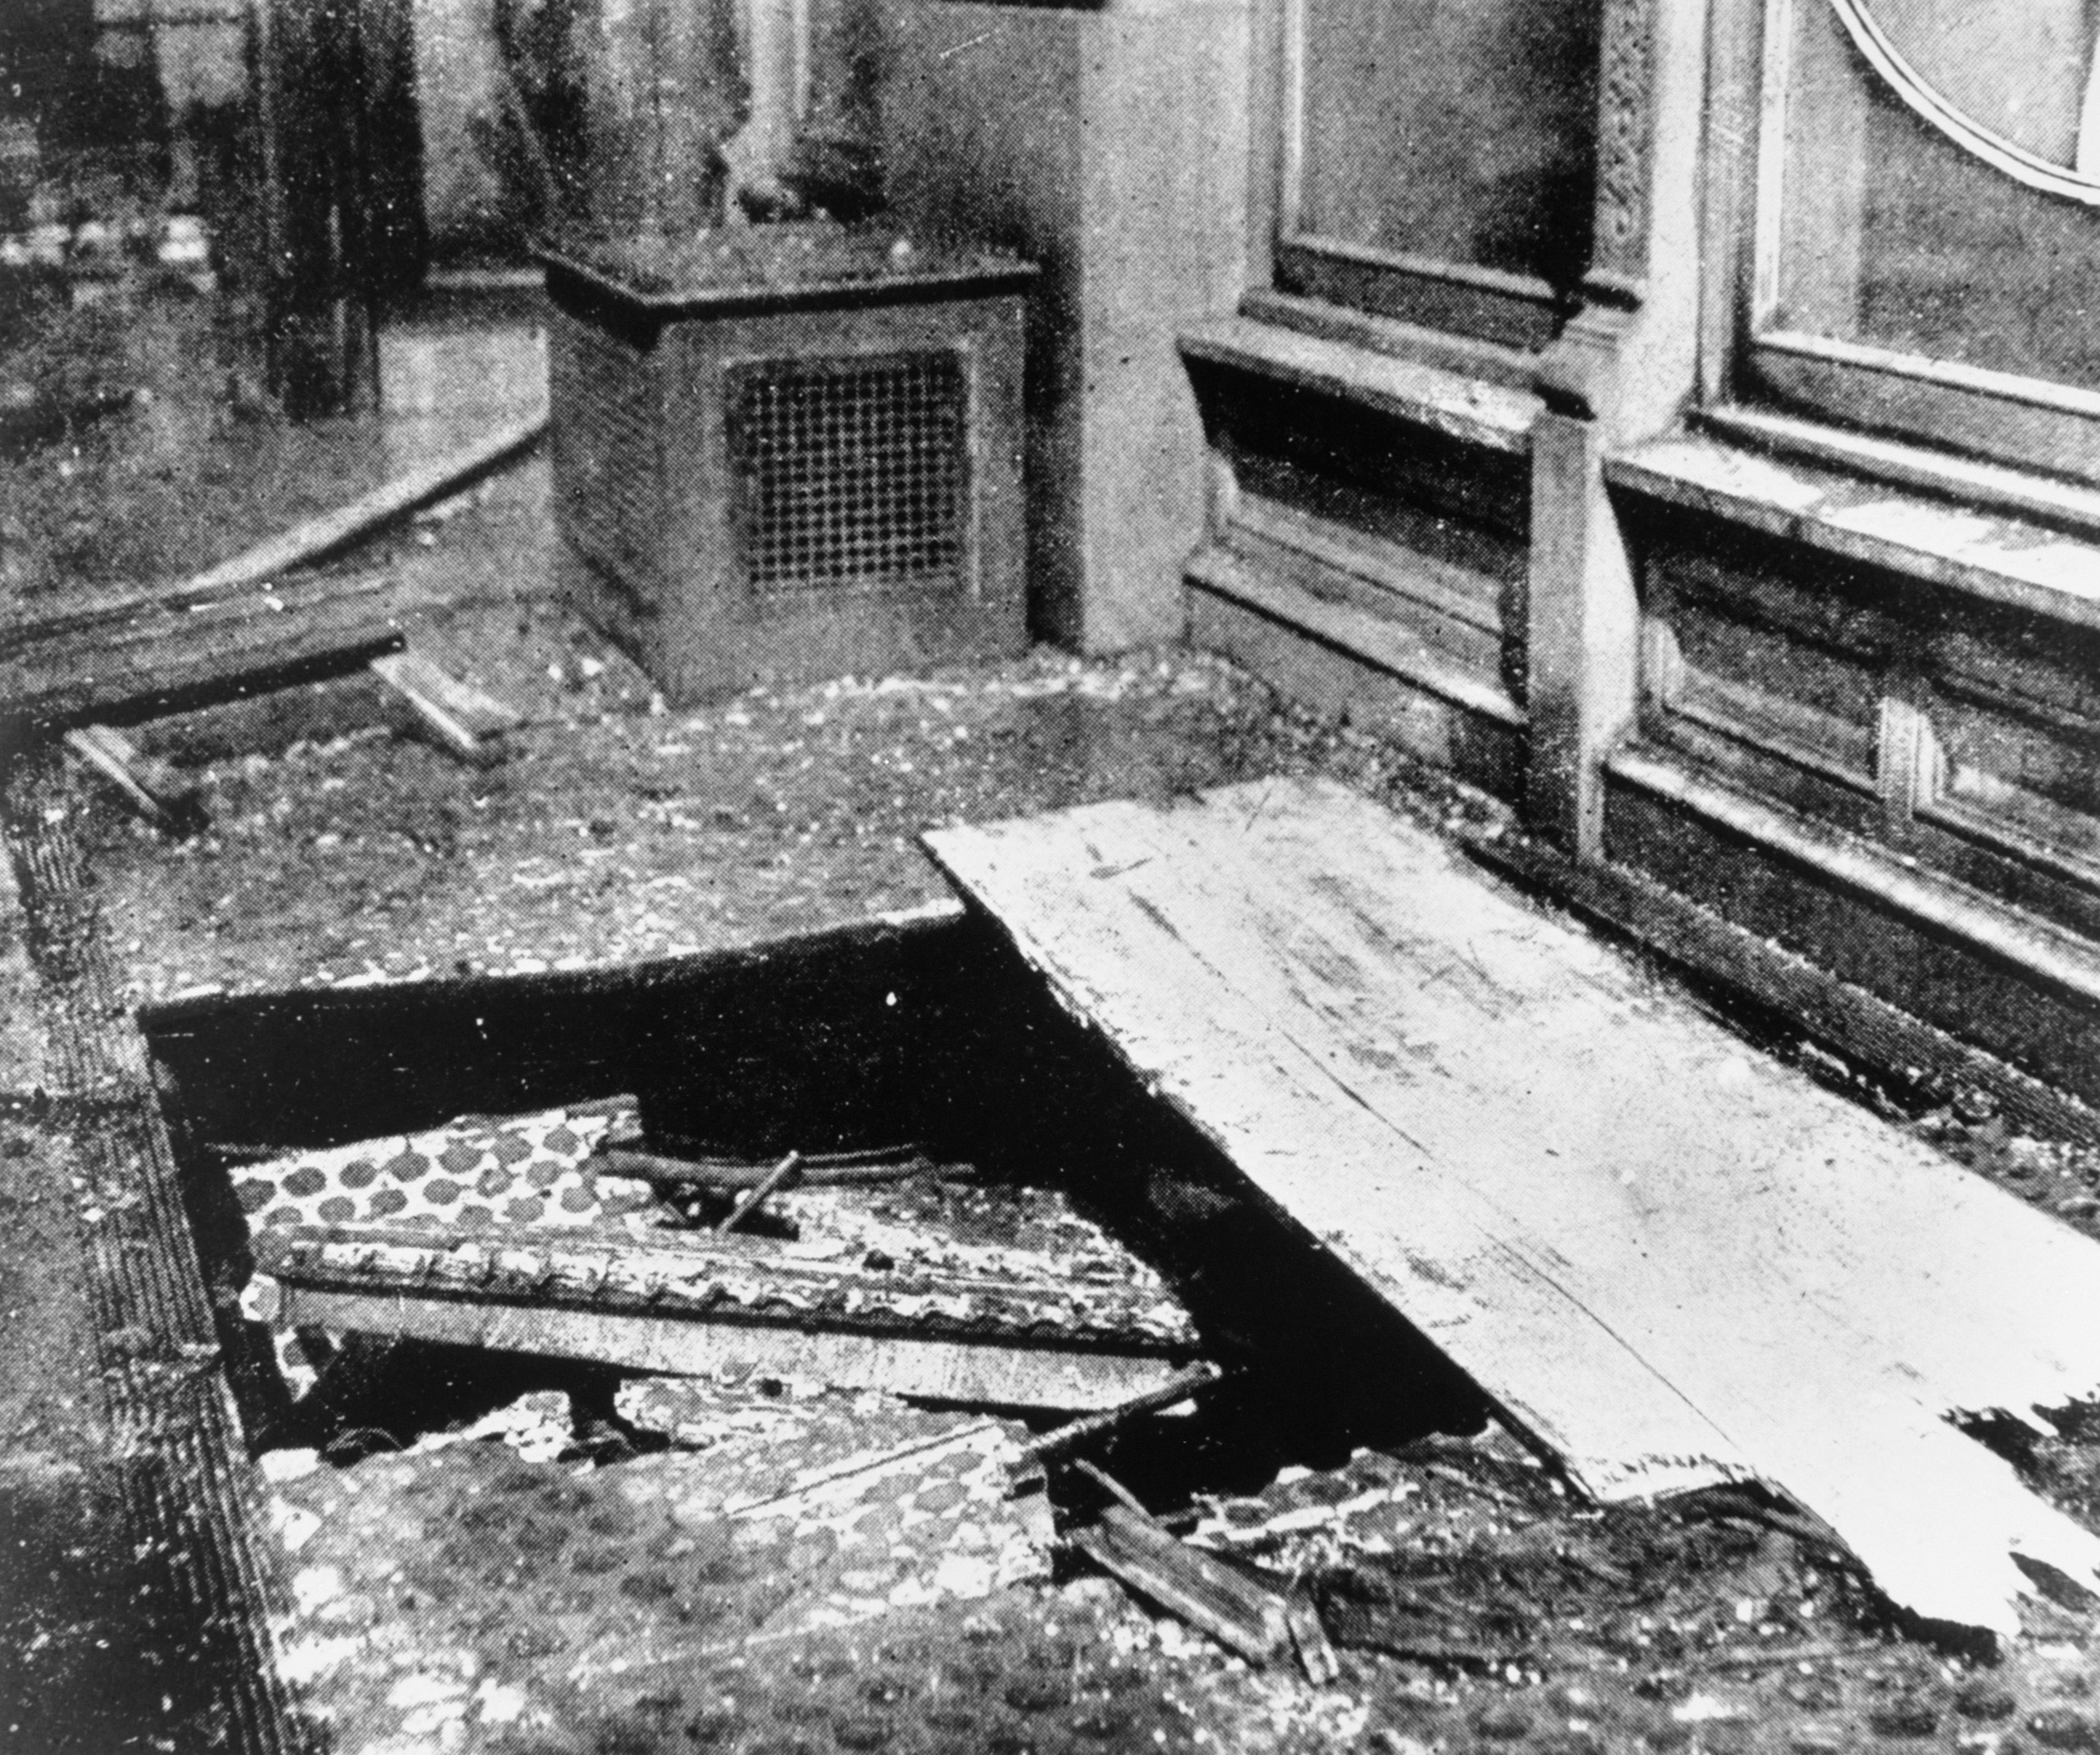 On March 25, 1911, 146 immigrant garment workers were killed after they were trapped on the upper floors of the Asch Building after the Triangle Shirtwaist Factory caught fire. The owners of the factory had chained shut the exit doors, and the workers, who were mostly young women, perished in the fire or died after jumping from the ten story building. A sidewalk cellar's skylight was shattered by the fallen bodies of panic stricken workers.